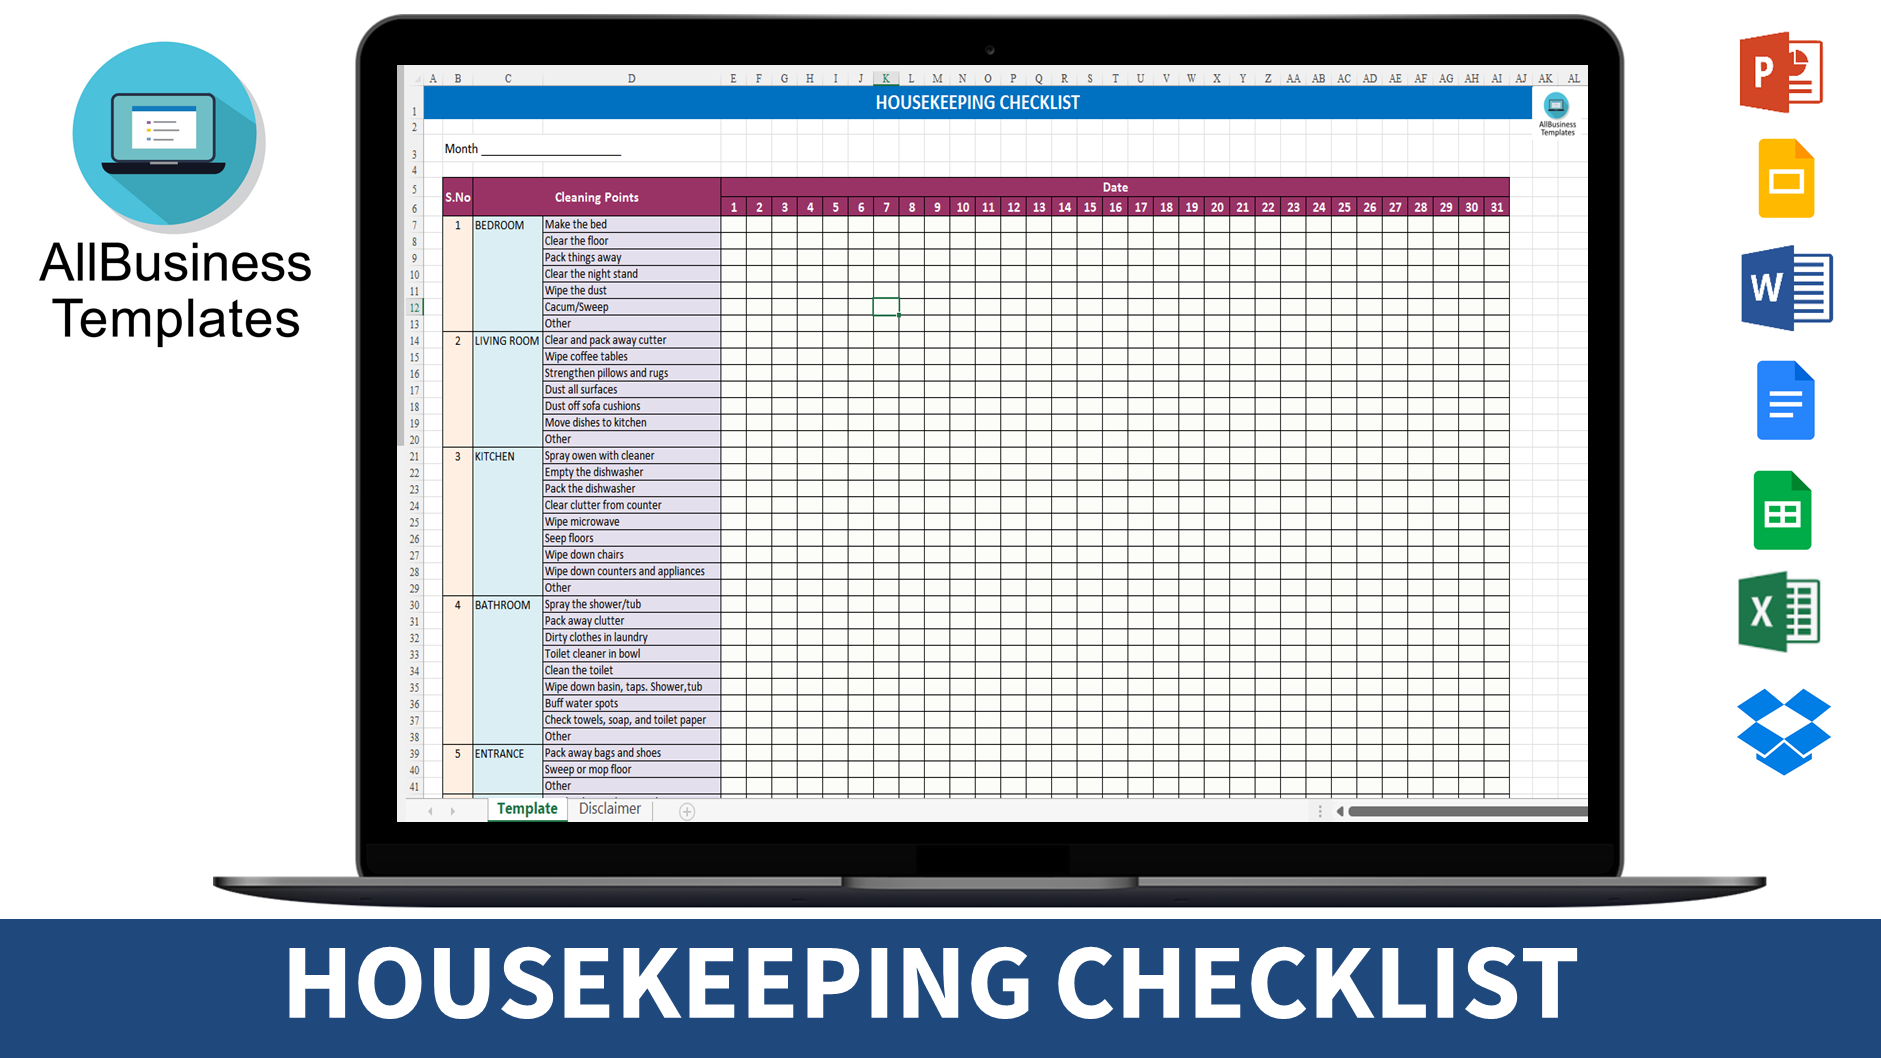 Housekeeping Checklist Excel main image